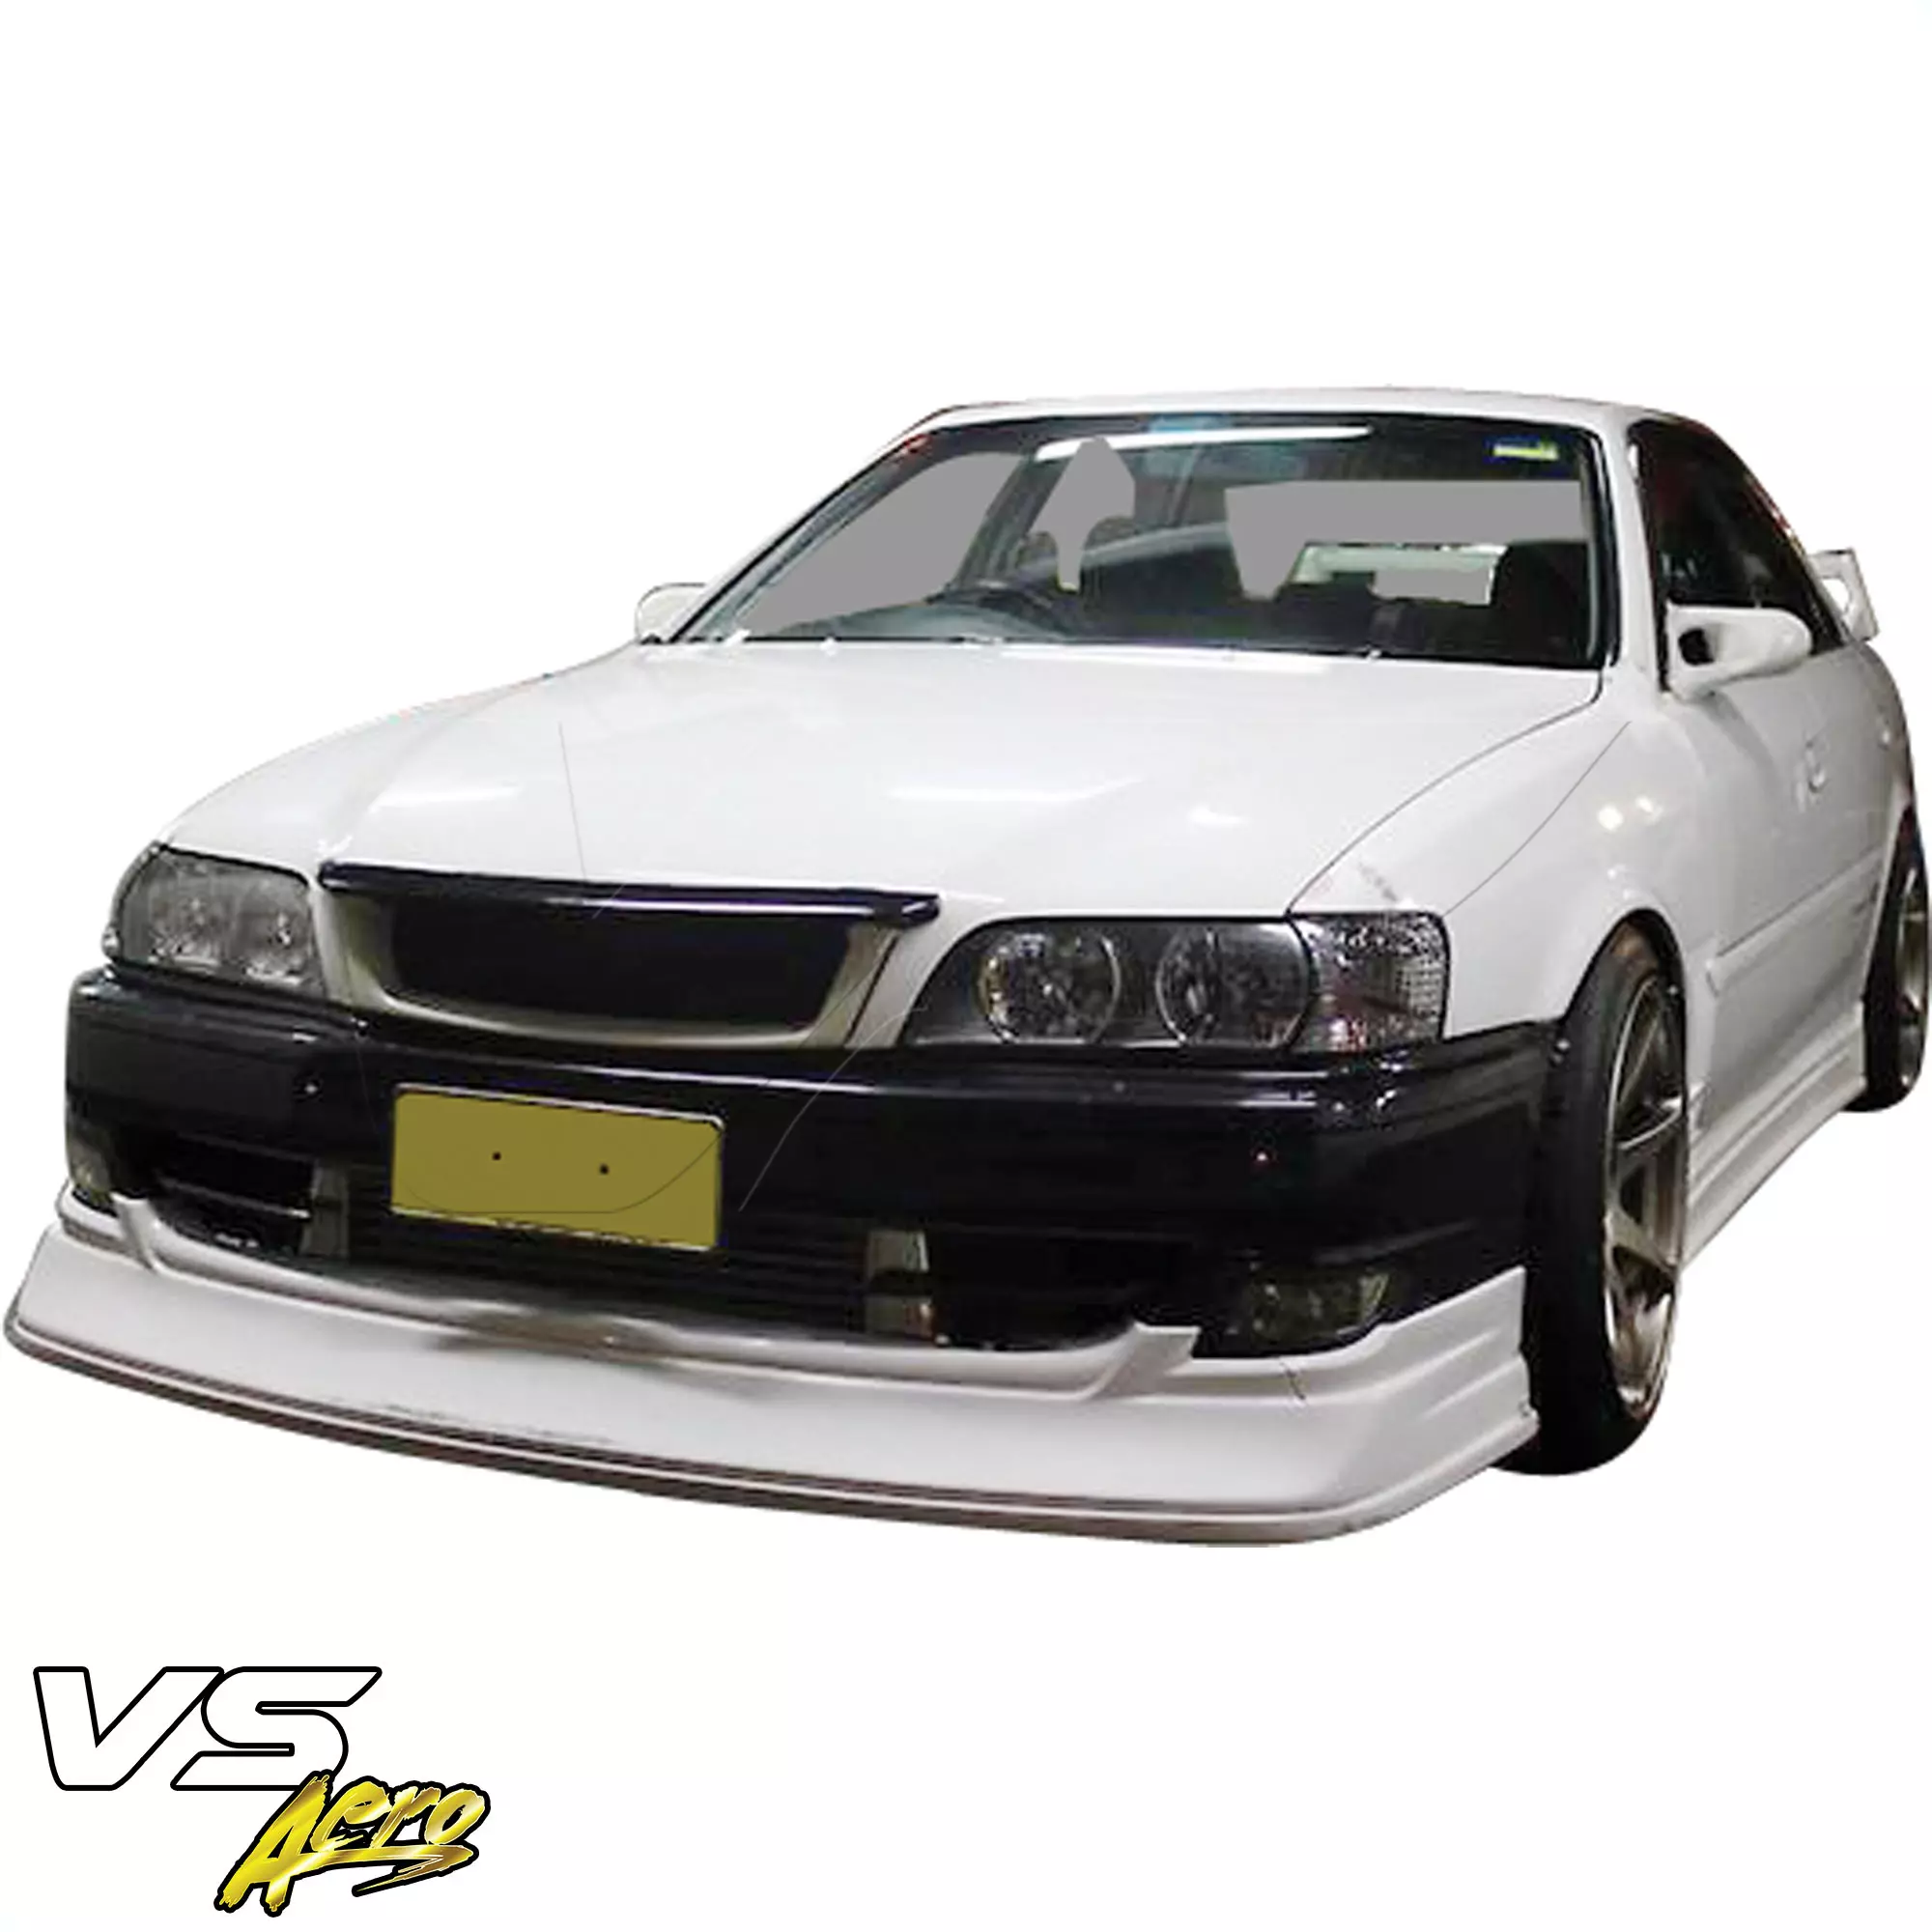 VSaero FRP TRAU Late Front Lip Valance > Toyota Chaser JZX100 1999-2000 - Image 29